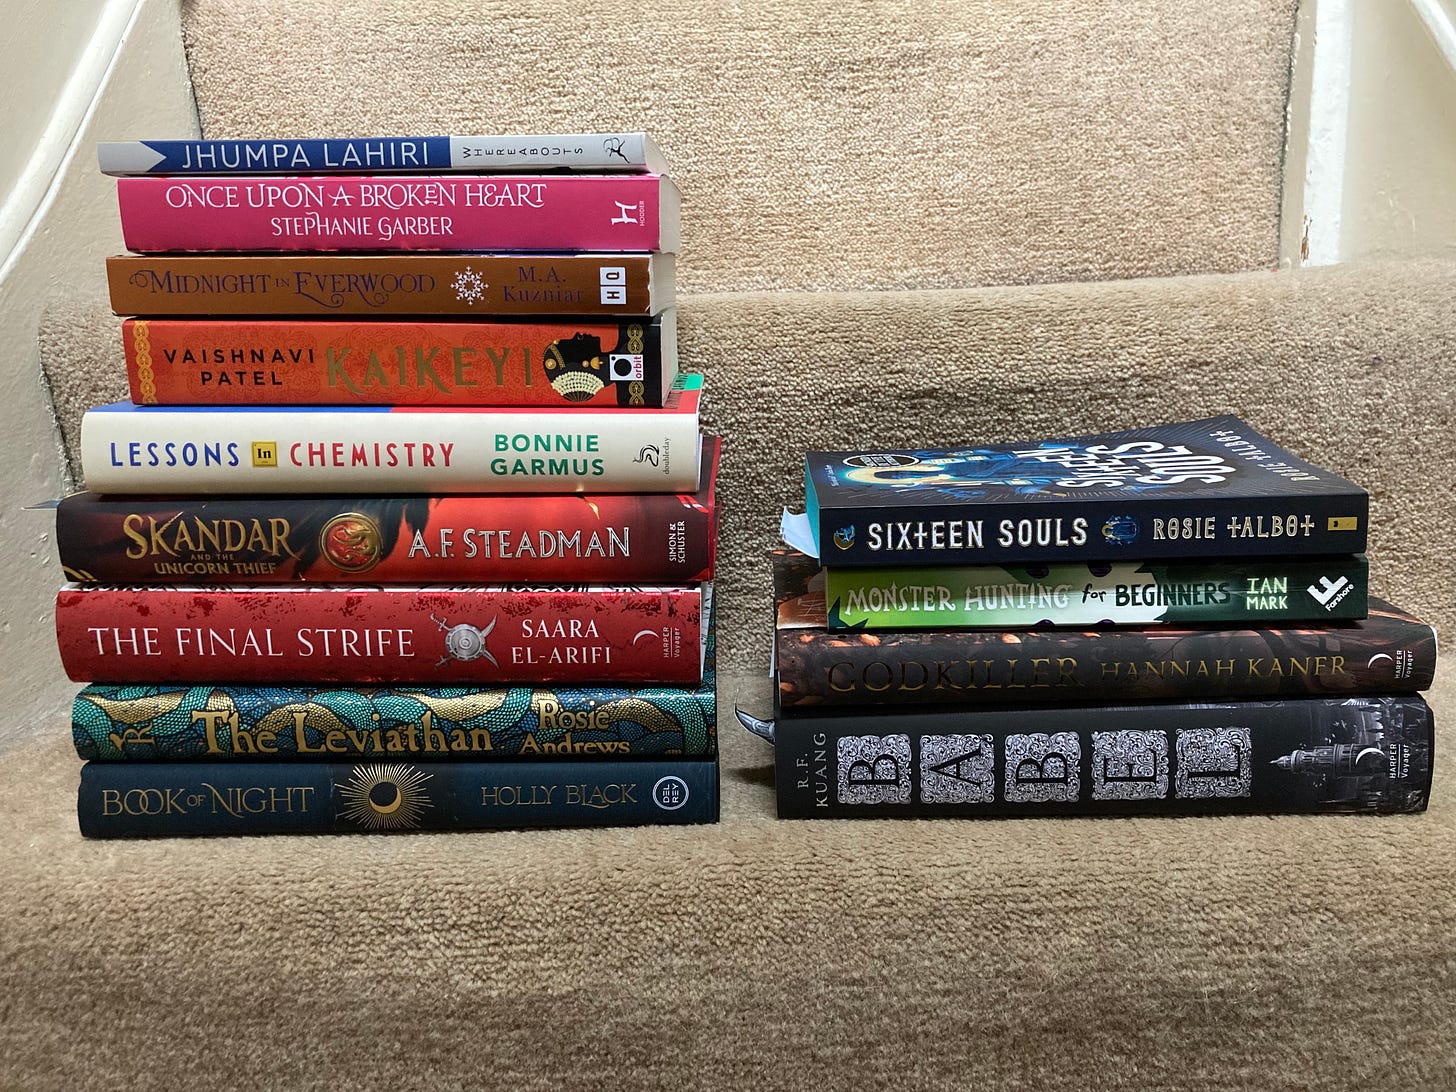 There are two stacks of books situated on carpeted stairs. The one on the left, various titles, is larger than the one on the left, which includes the books mentioned below as read/finished: Babel, Monster Hunters, Godkiller and Sixteen Souls.